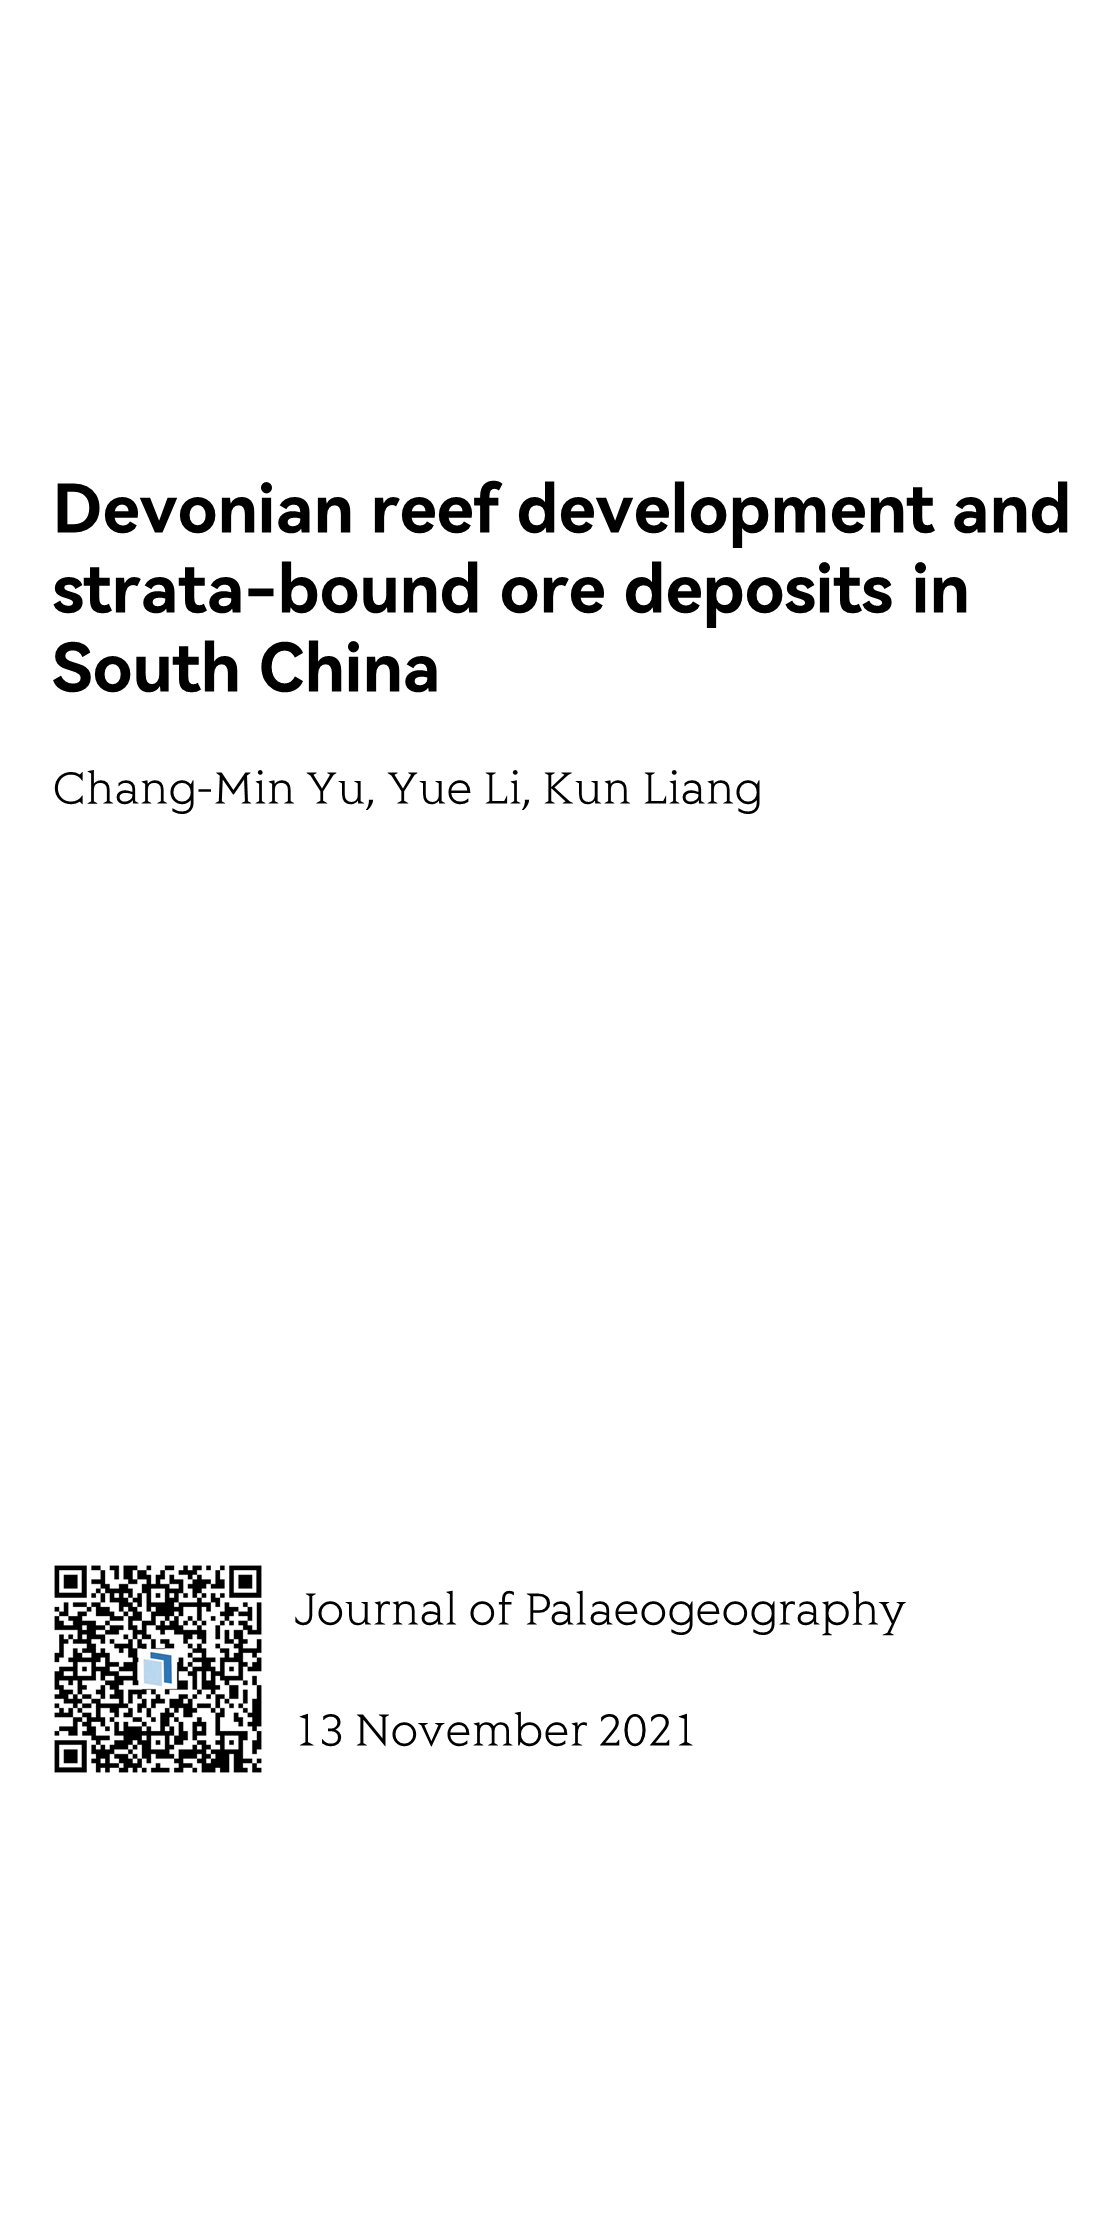 Devonian reef development and strata-bound ore deposits in South China_1